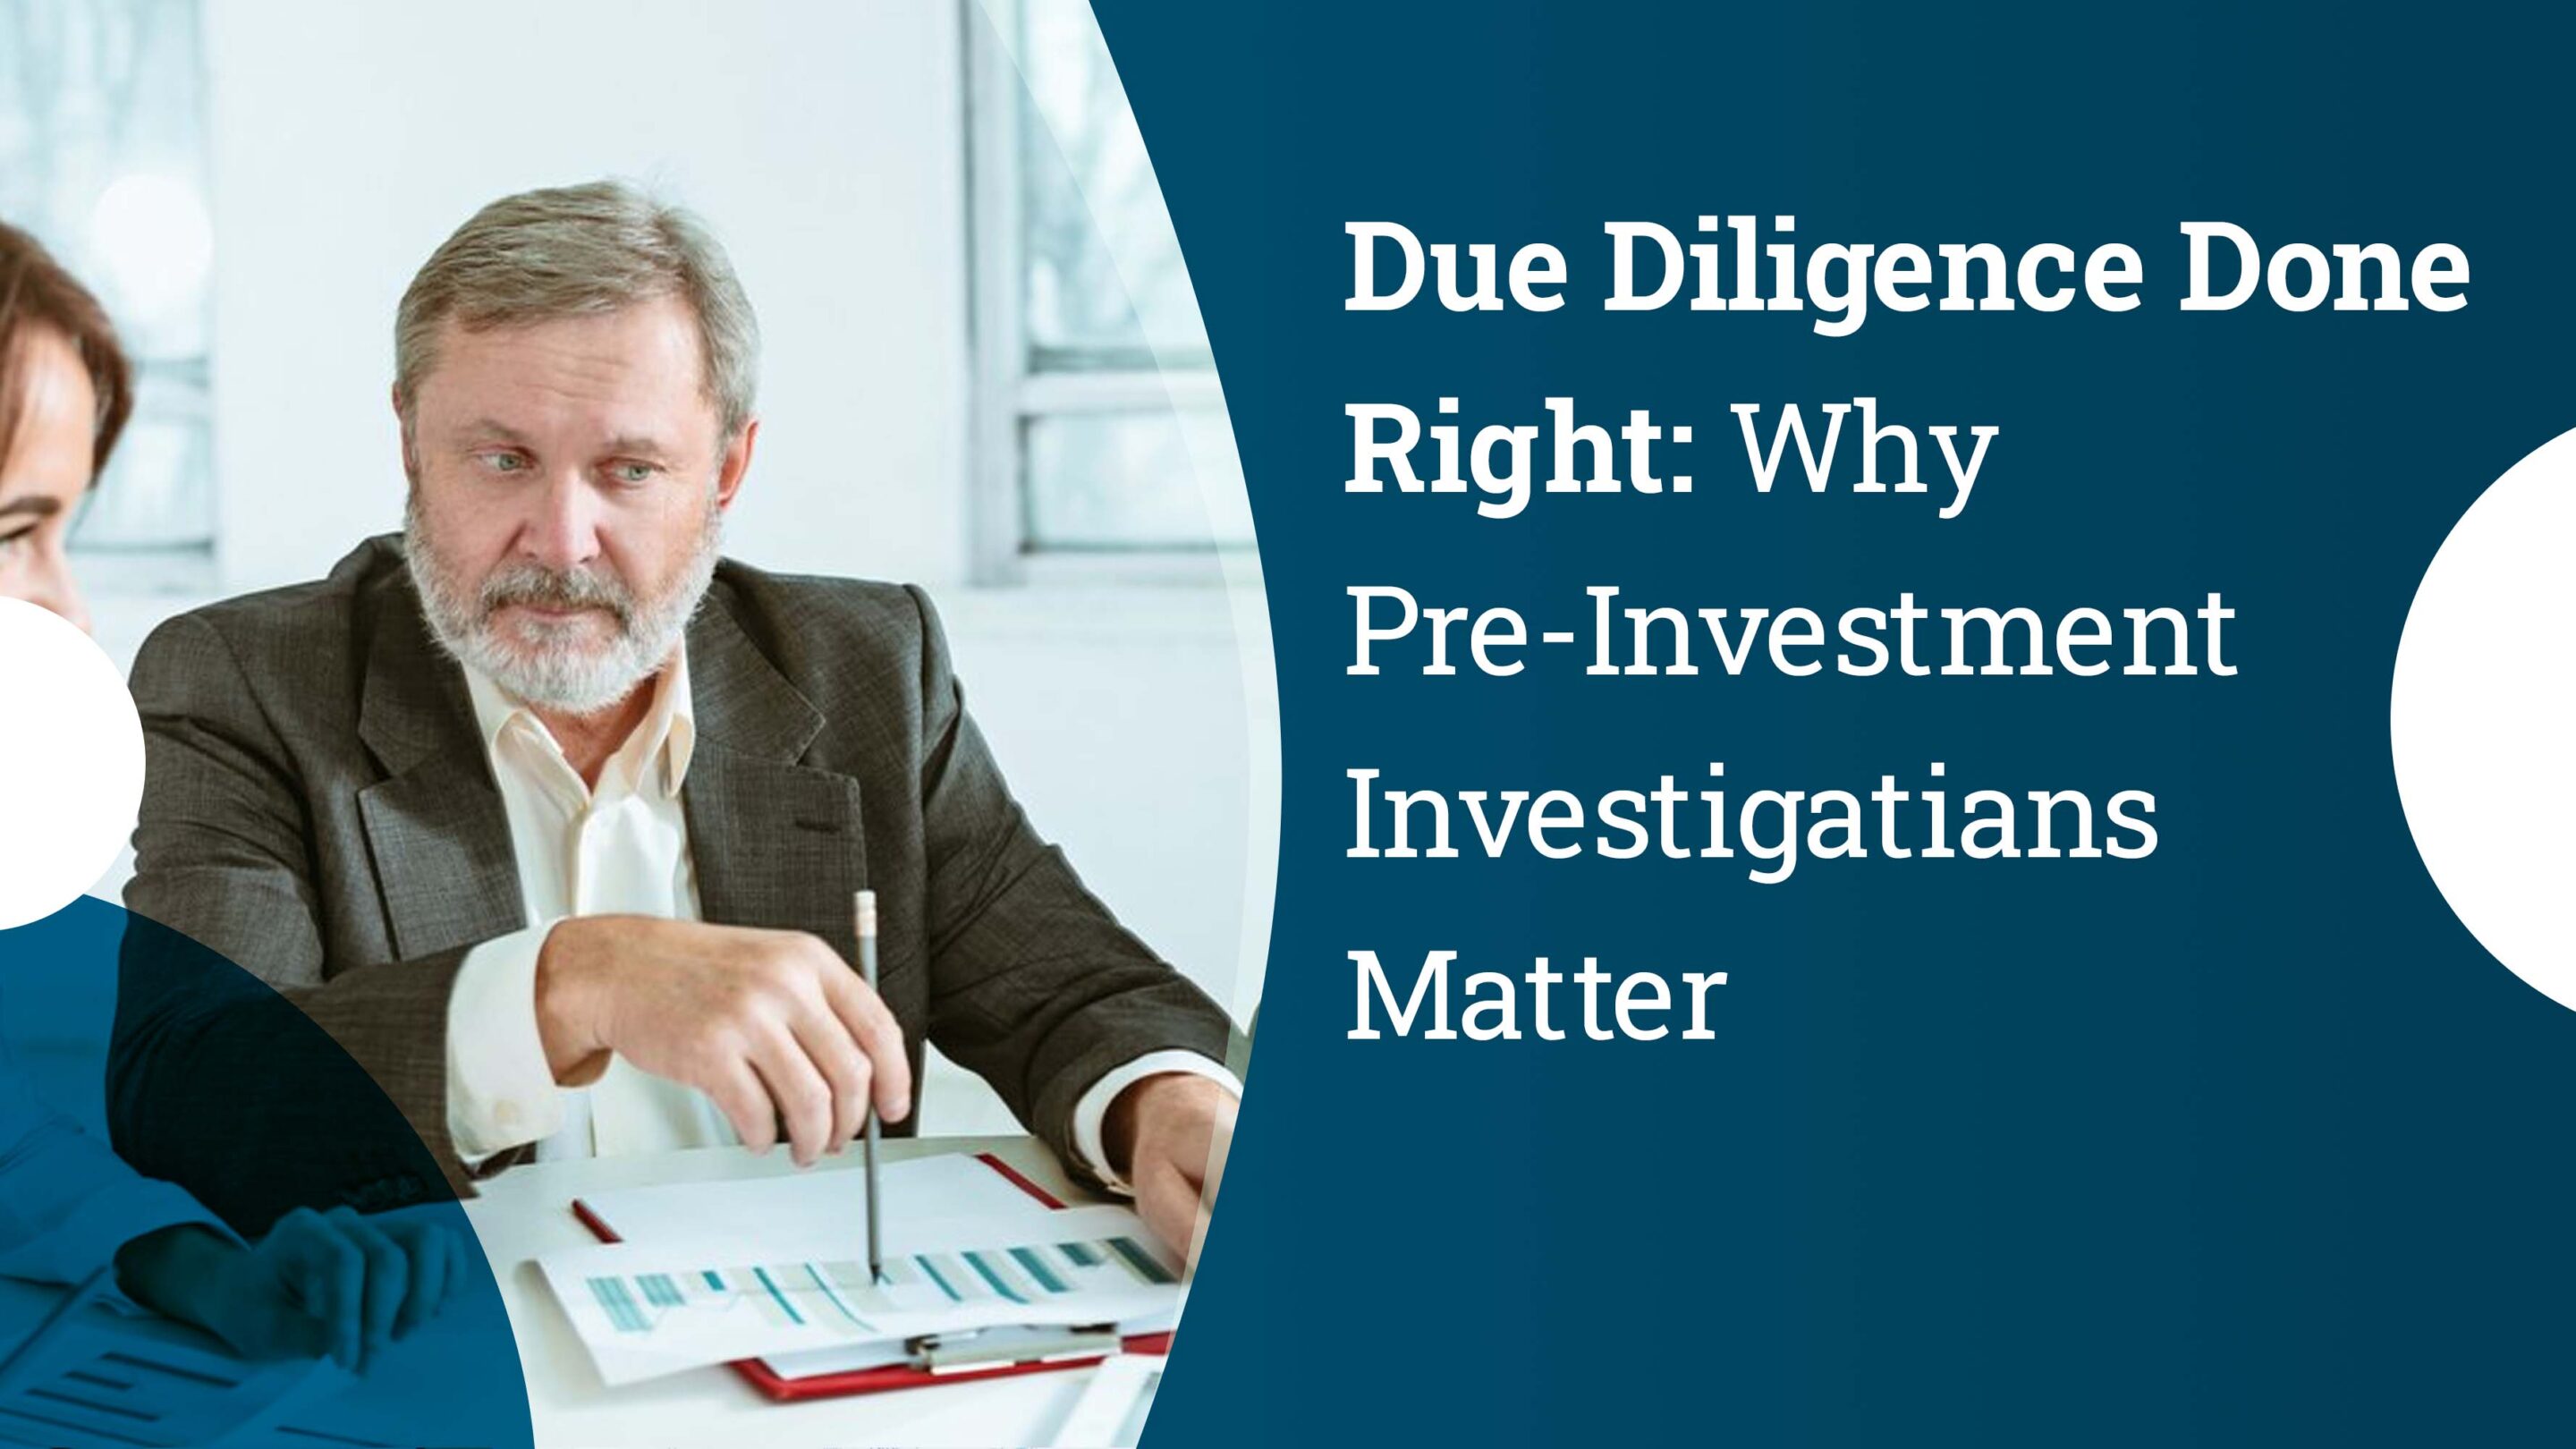 Due Diligence Done Right: Why Pre-Investment Investigations Matter